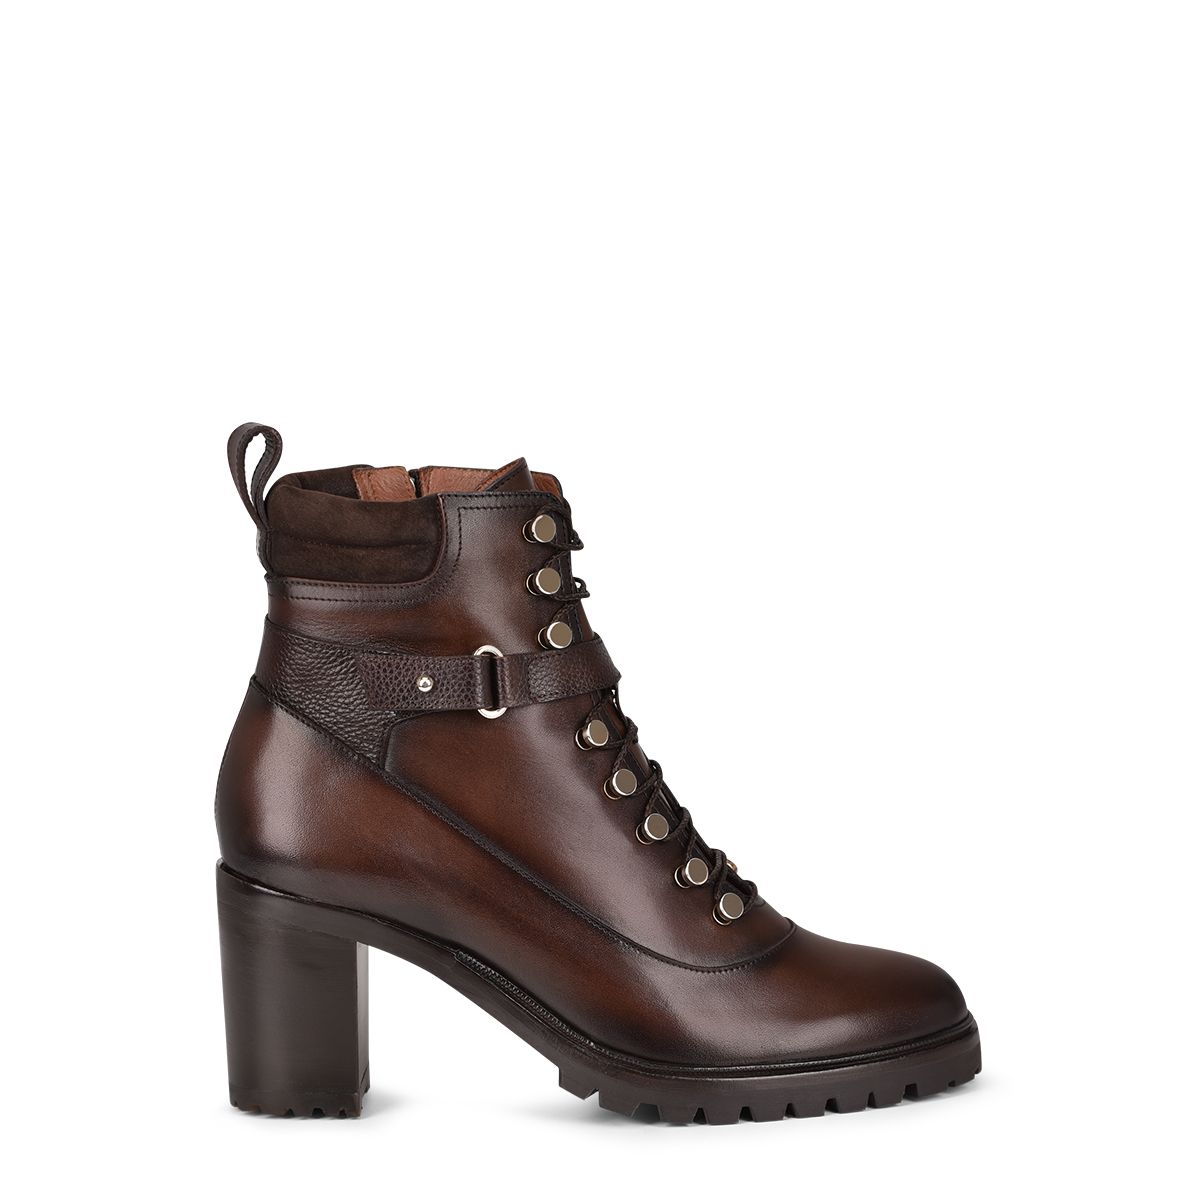 K33TSRS - Franco Cuadra brown casual fashion leather ankle boots for women-Kuet.us